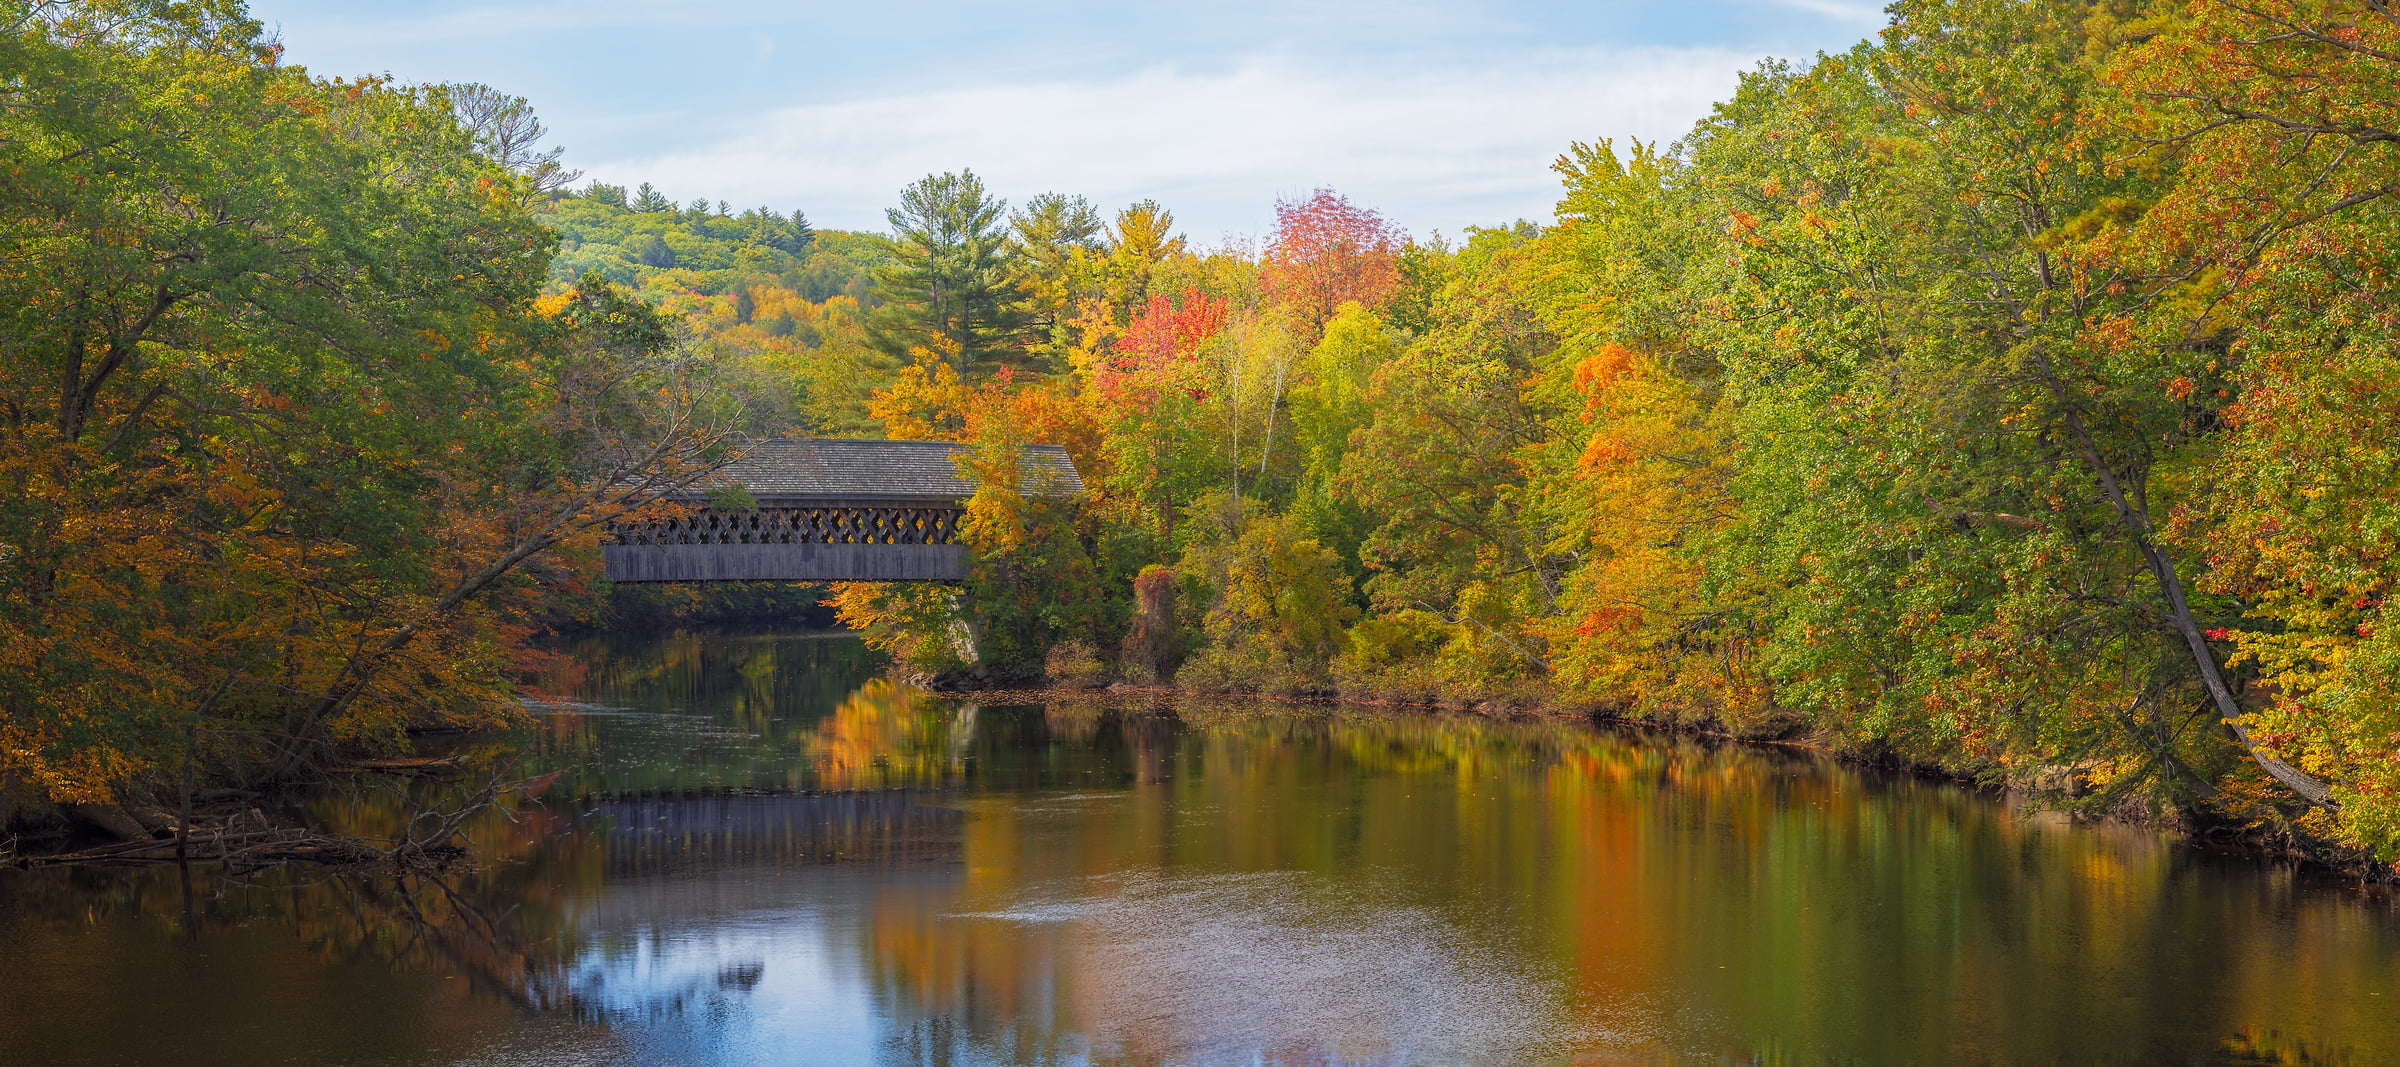 674 megapixels! A very high resolution, large-format canvas photo of a New England scene with a covered bridge of a river and autumn foliage; photograph created by John Freeman in Bridge Street, Henniker, New Hampshire.